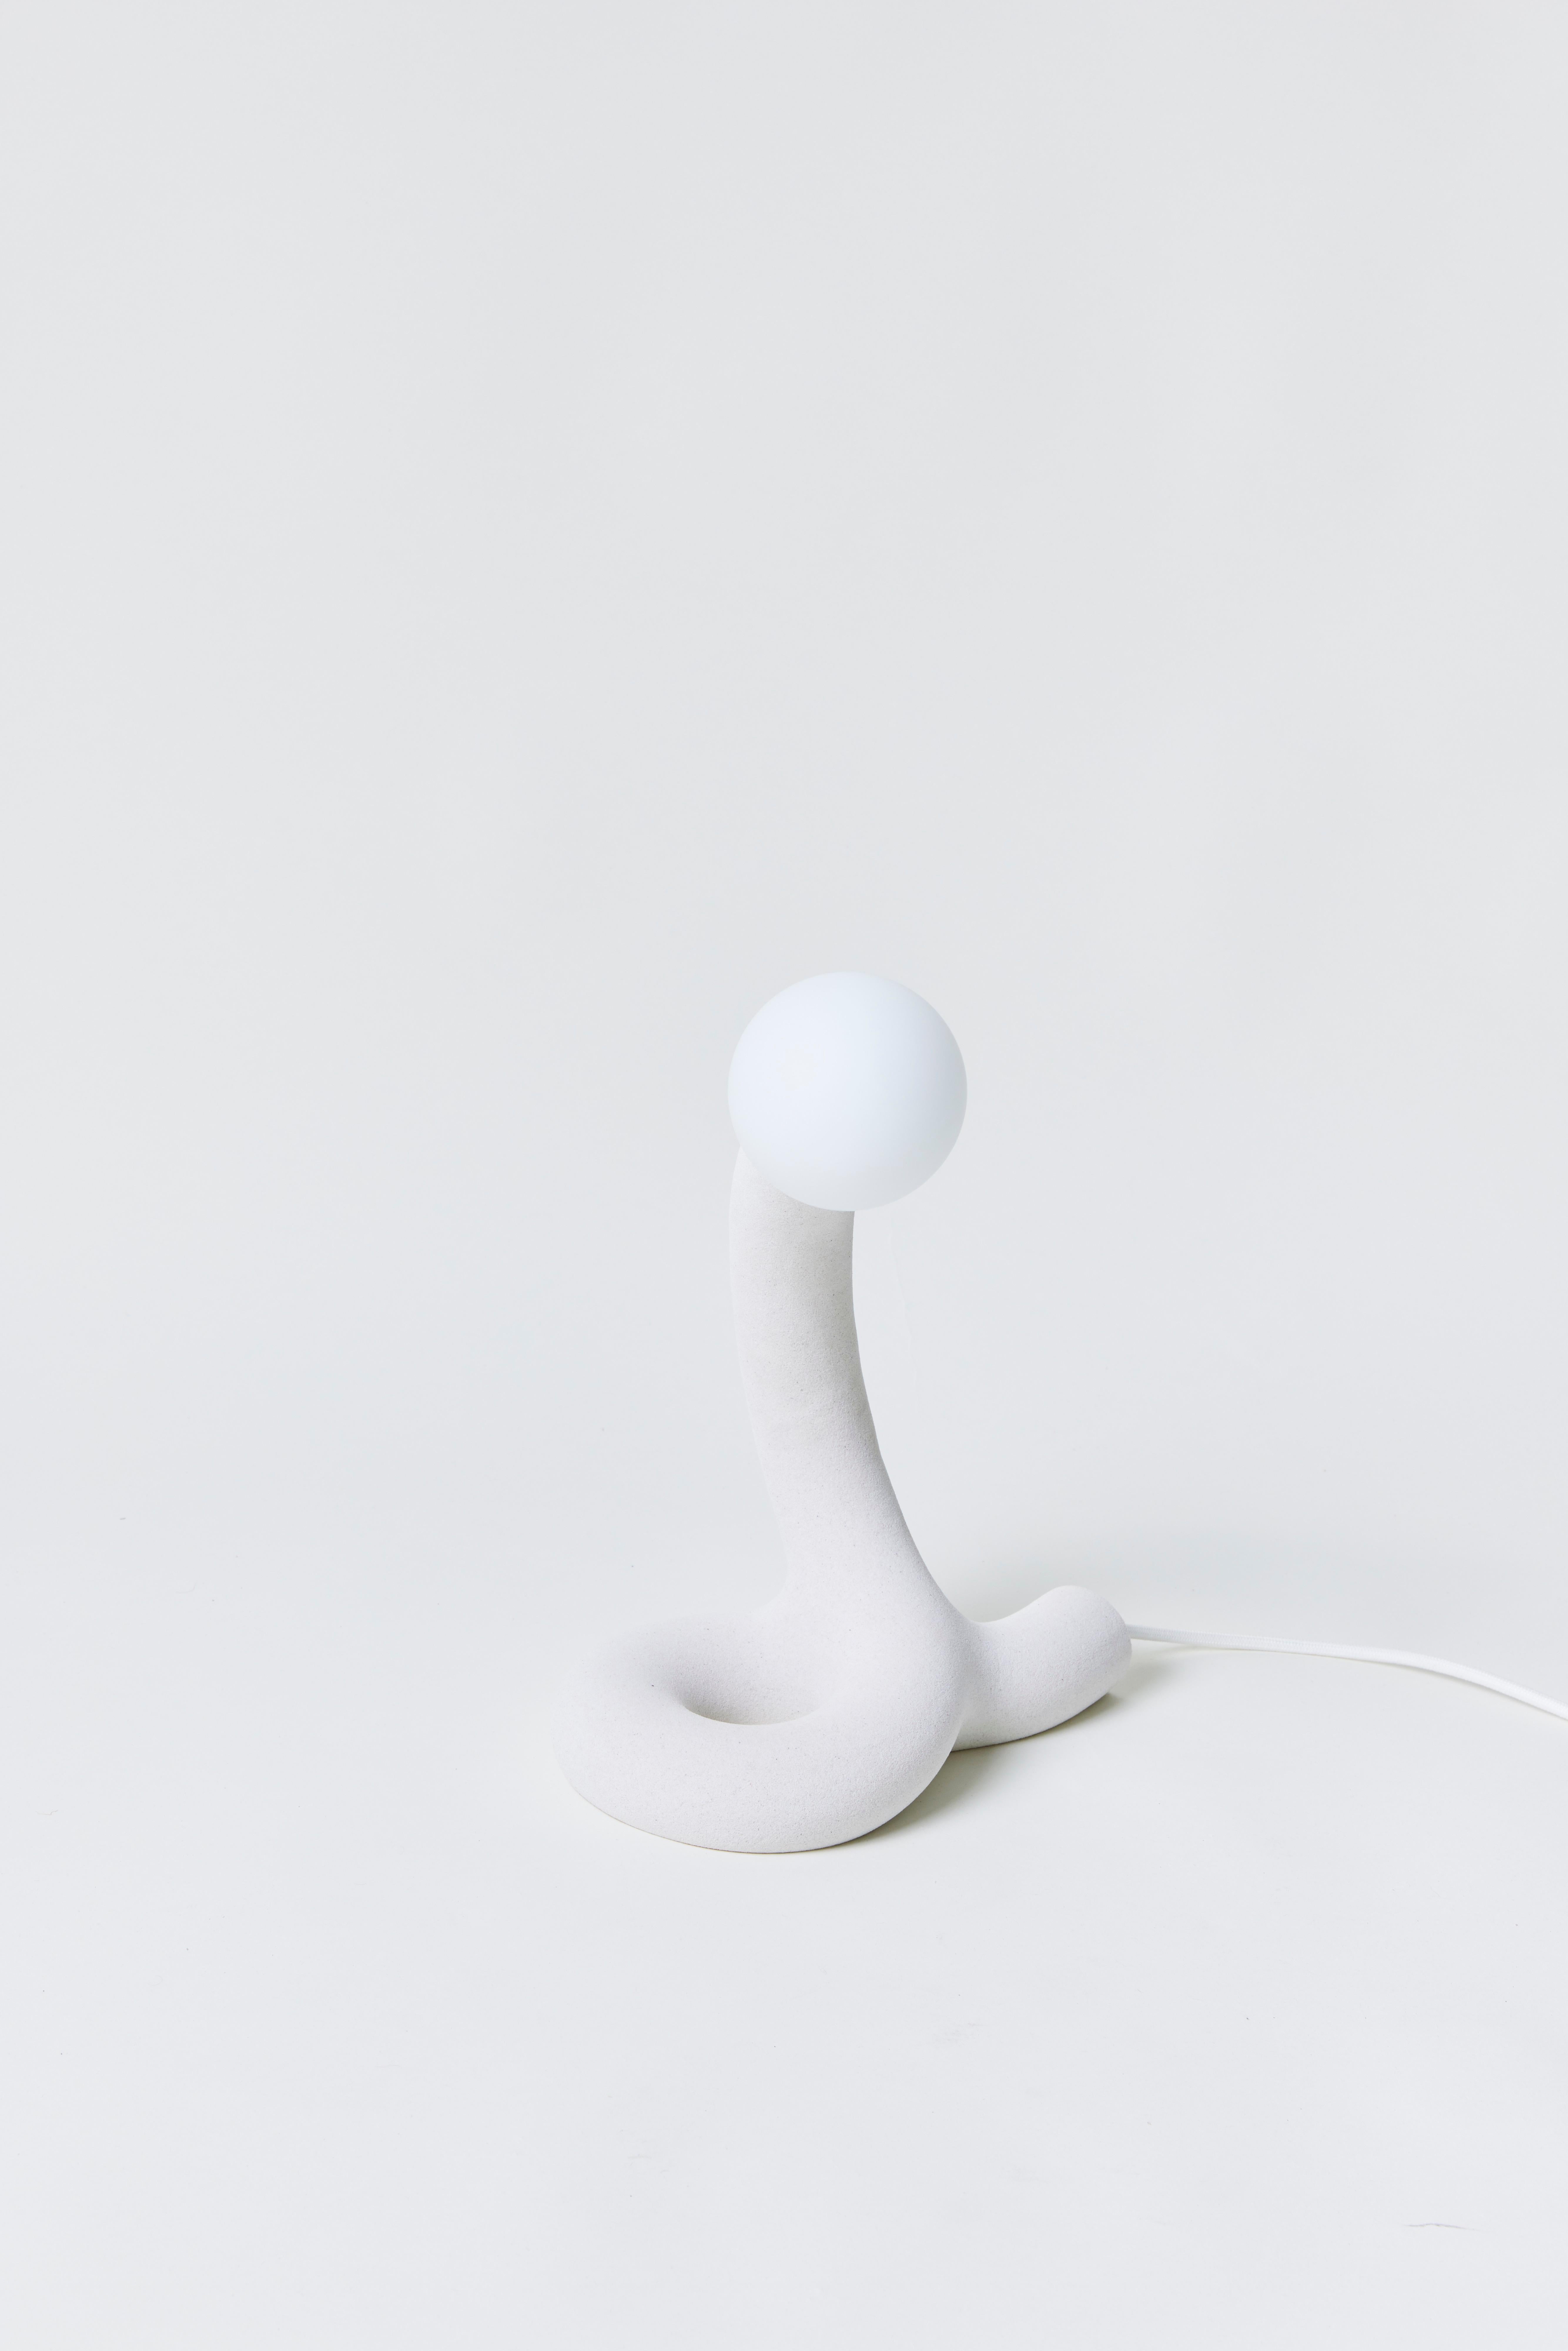 Basic Knot Variations 6 Desk Light by Hot Wire Extensions
Dimensions: D 25 x W 18 x H 36 cm 
Materials: Waste nylon powder, natural white marble sand, copper pipe, hand-blown glass bulbs, natural cotton electrical cord.
2 kg

Different sands and